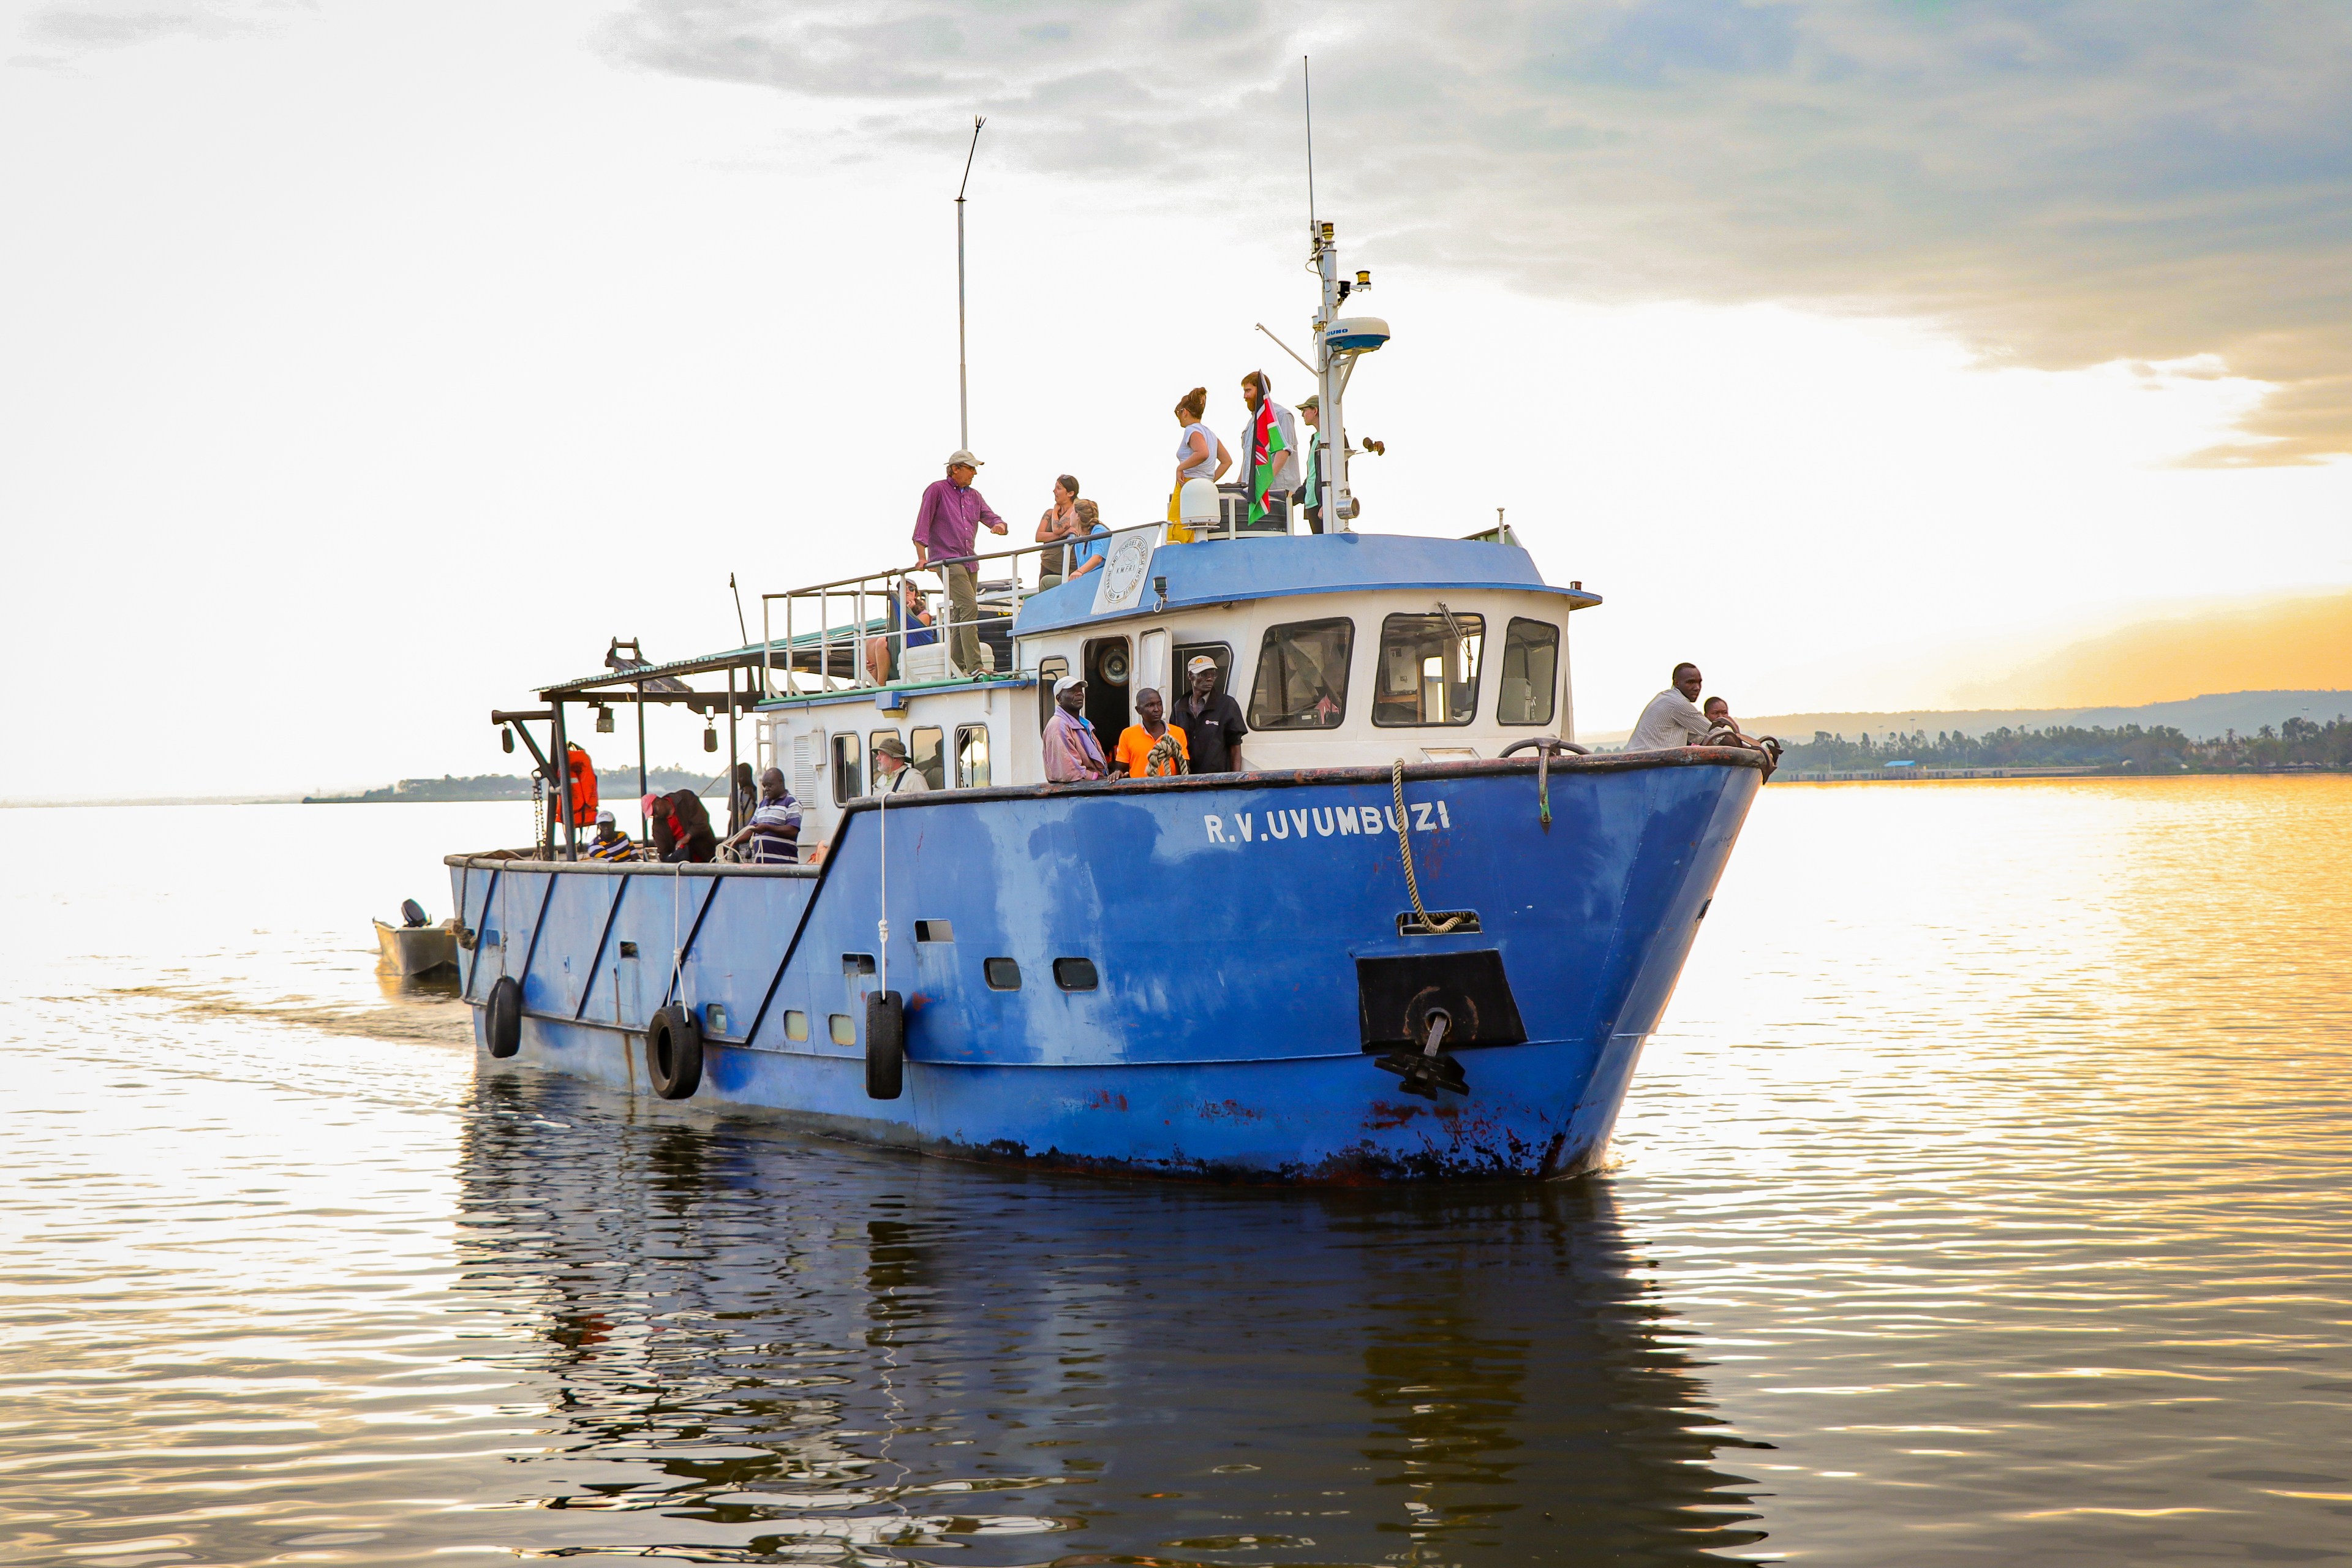 BGSU researchers and other scientists ride a boat on Africa's Lake Victoria